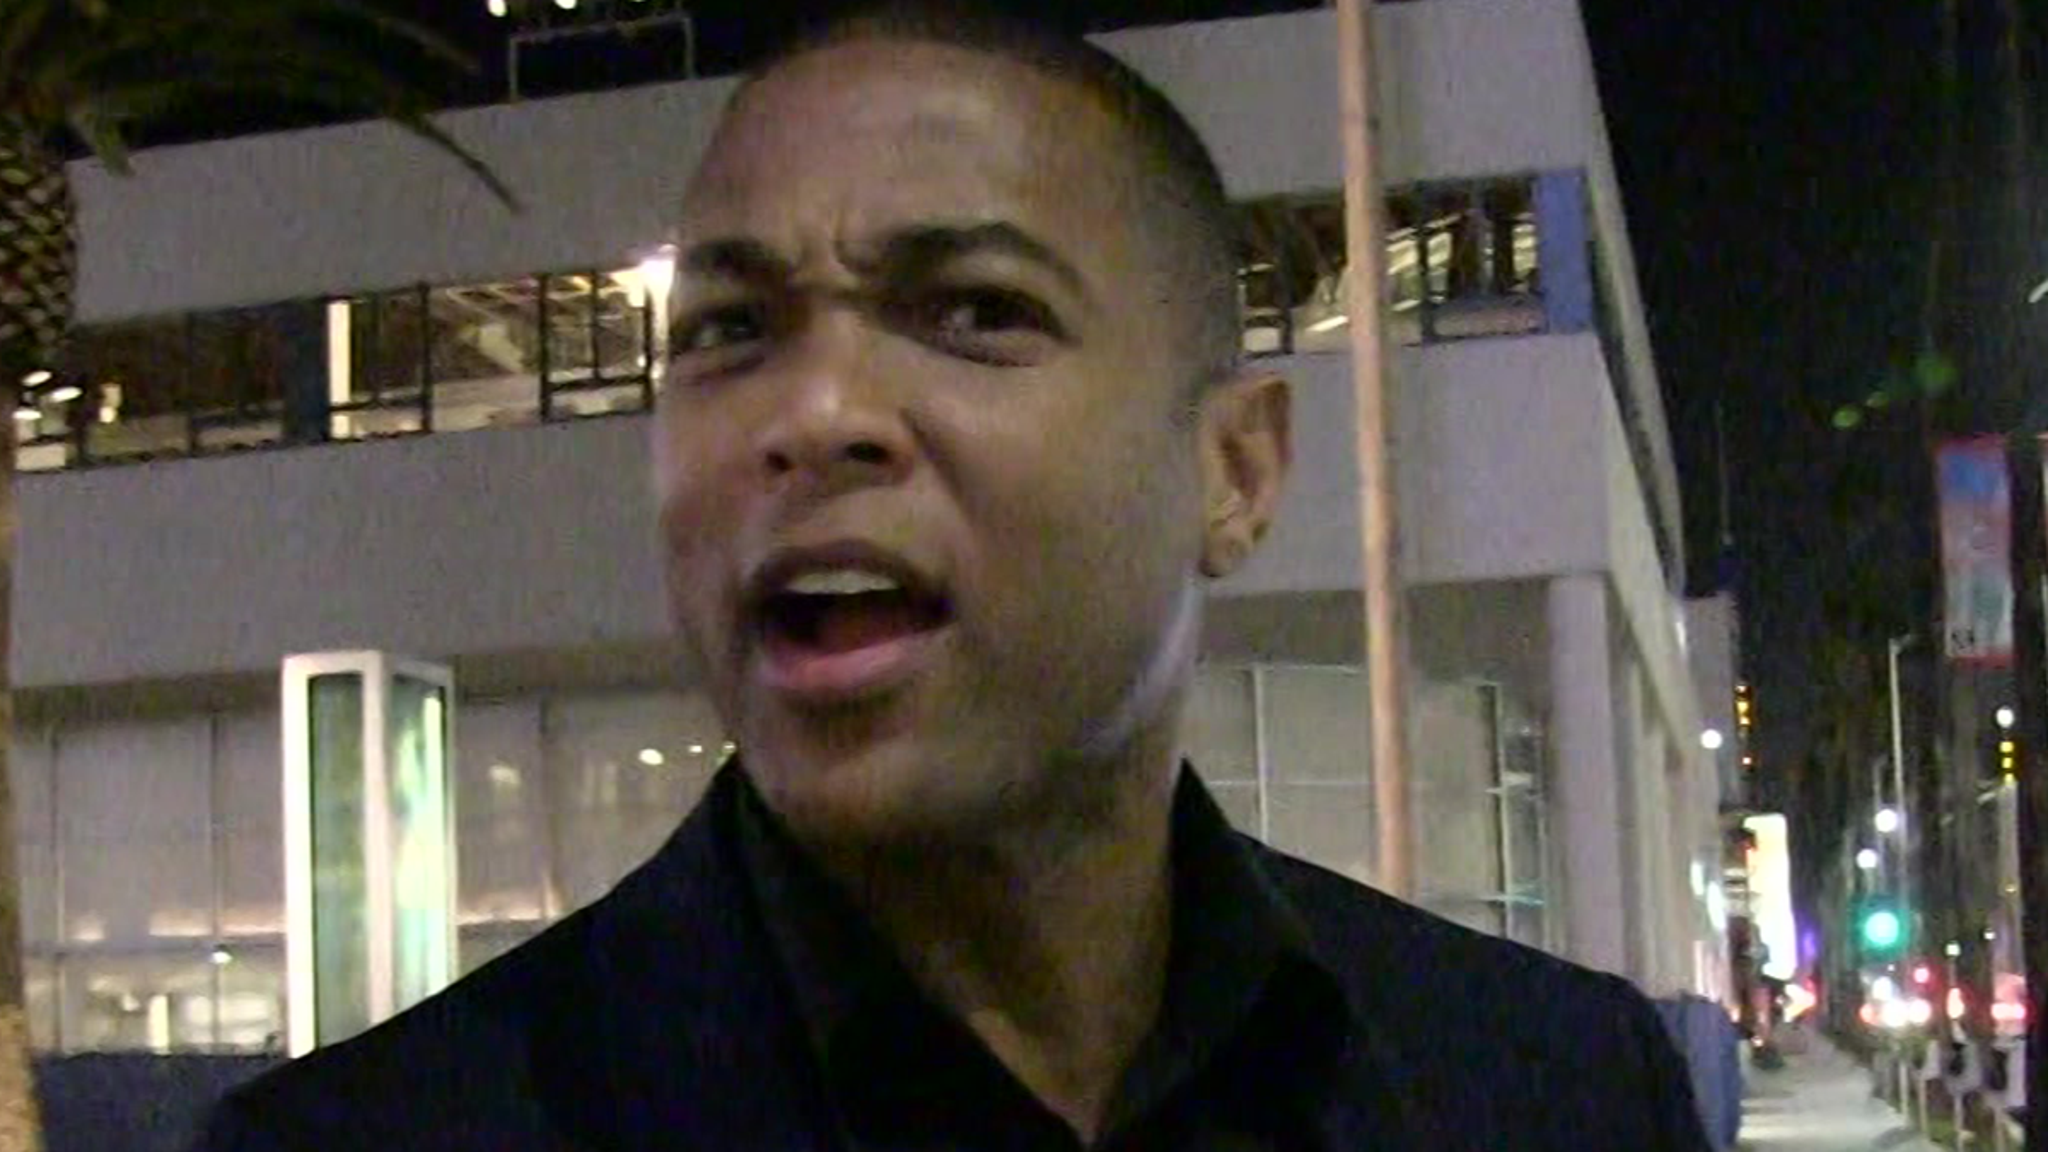 Don Lemon Will Miss Monday’s CNN Morning Show After Sexist Comment